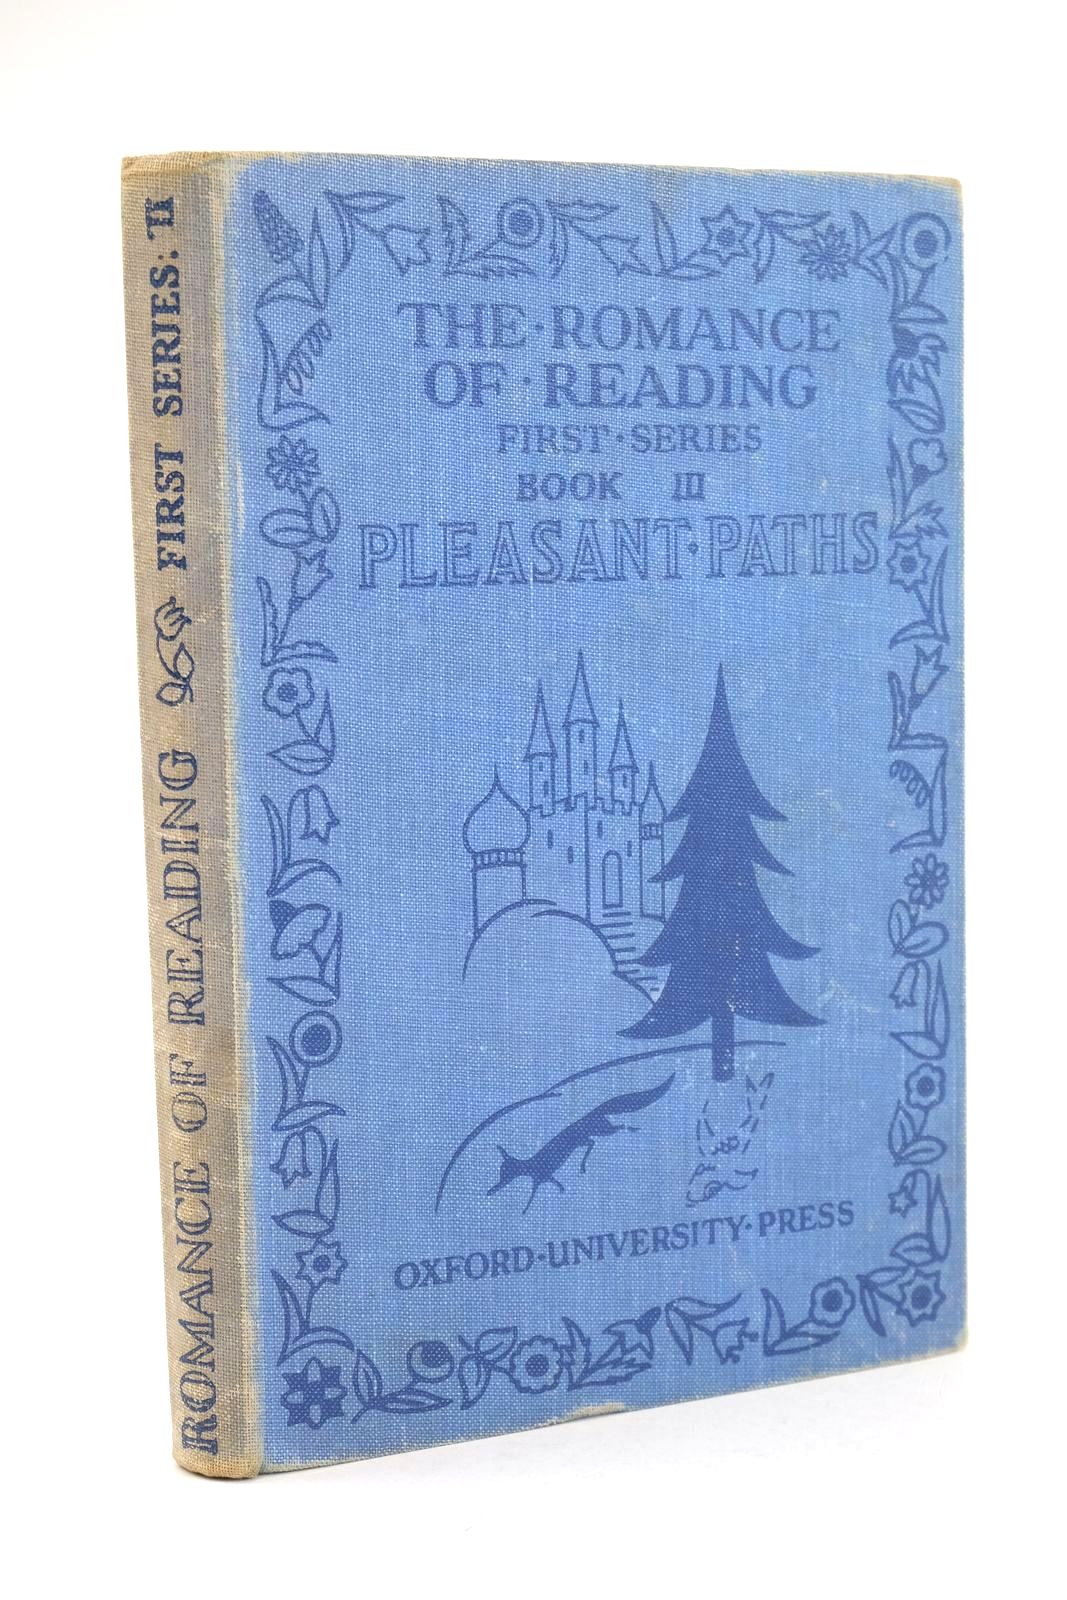 Photo of THE ROMANCE OF READING FIRST SERIES BOOK III PLEASANT PATHS- Stock Number: 1324630